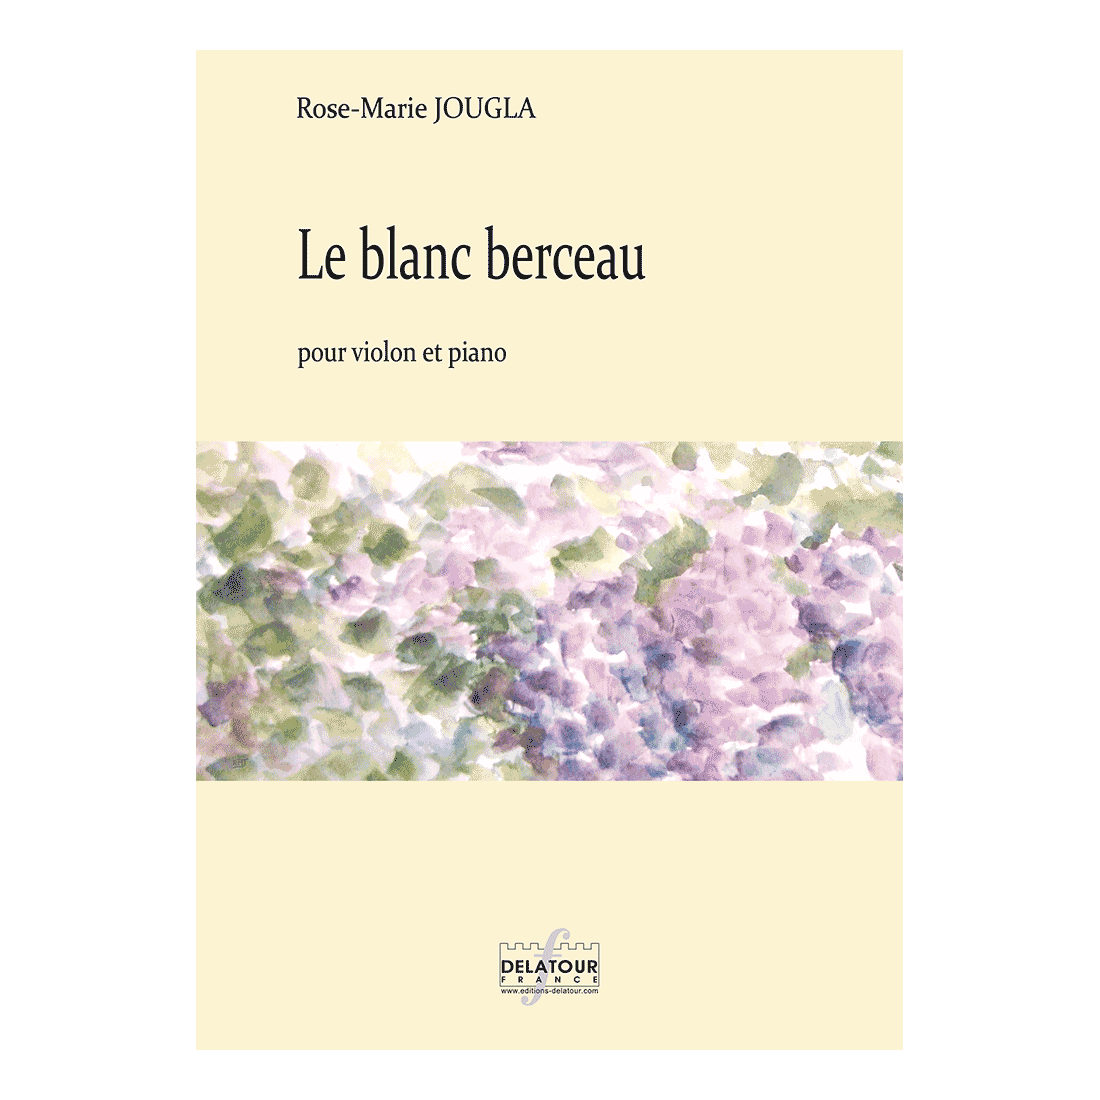 Le blanc berceau for violin and piano